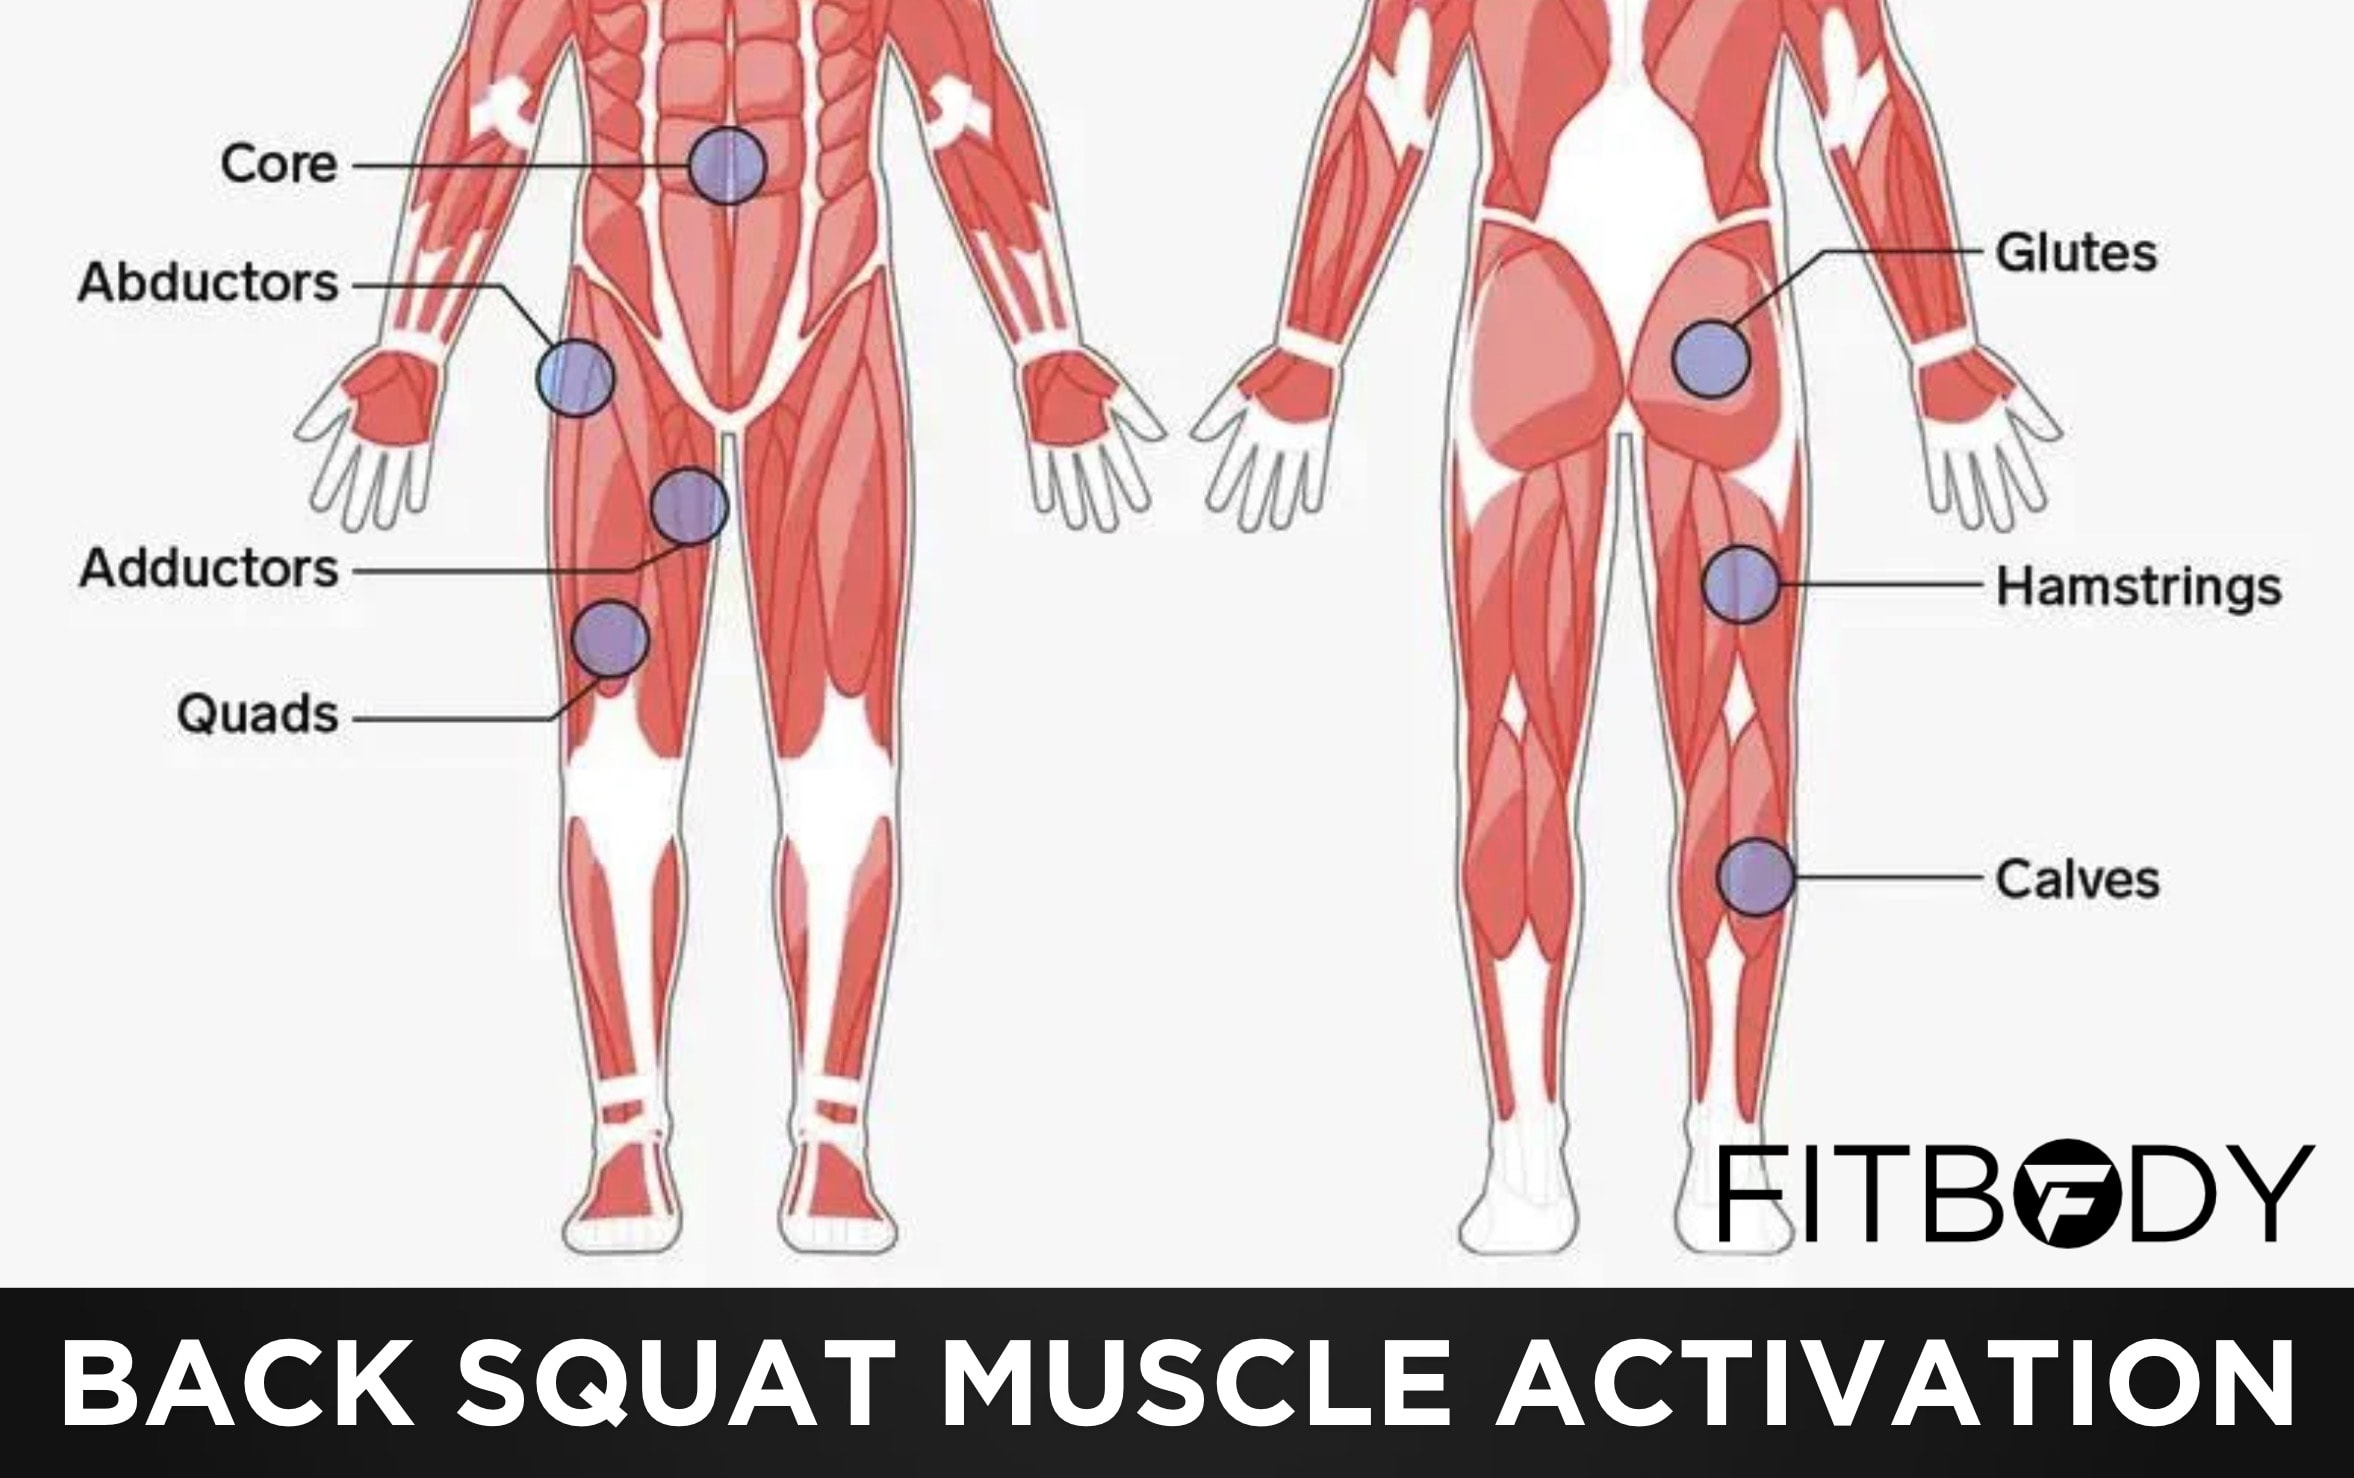 Back Squat Anatomy Muscle Activation